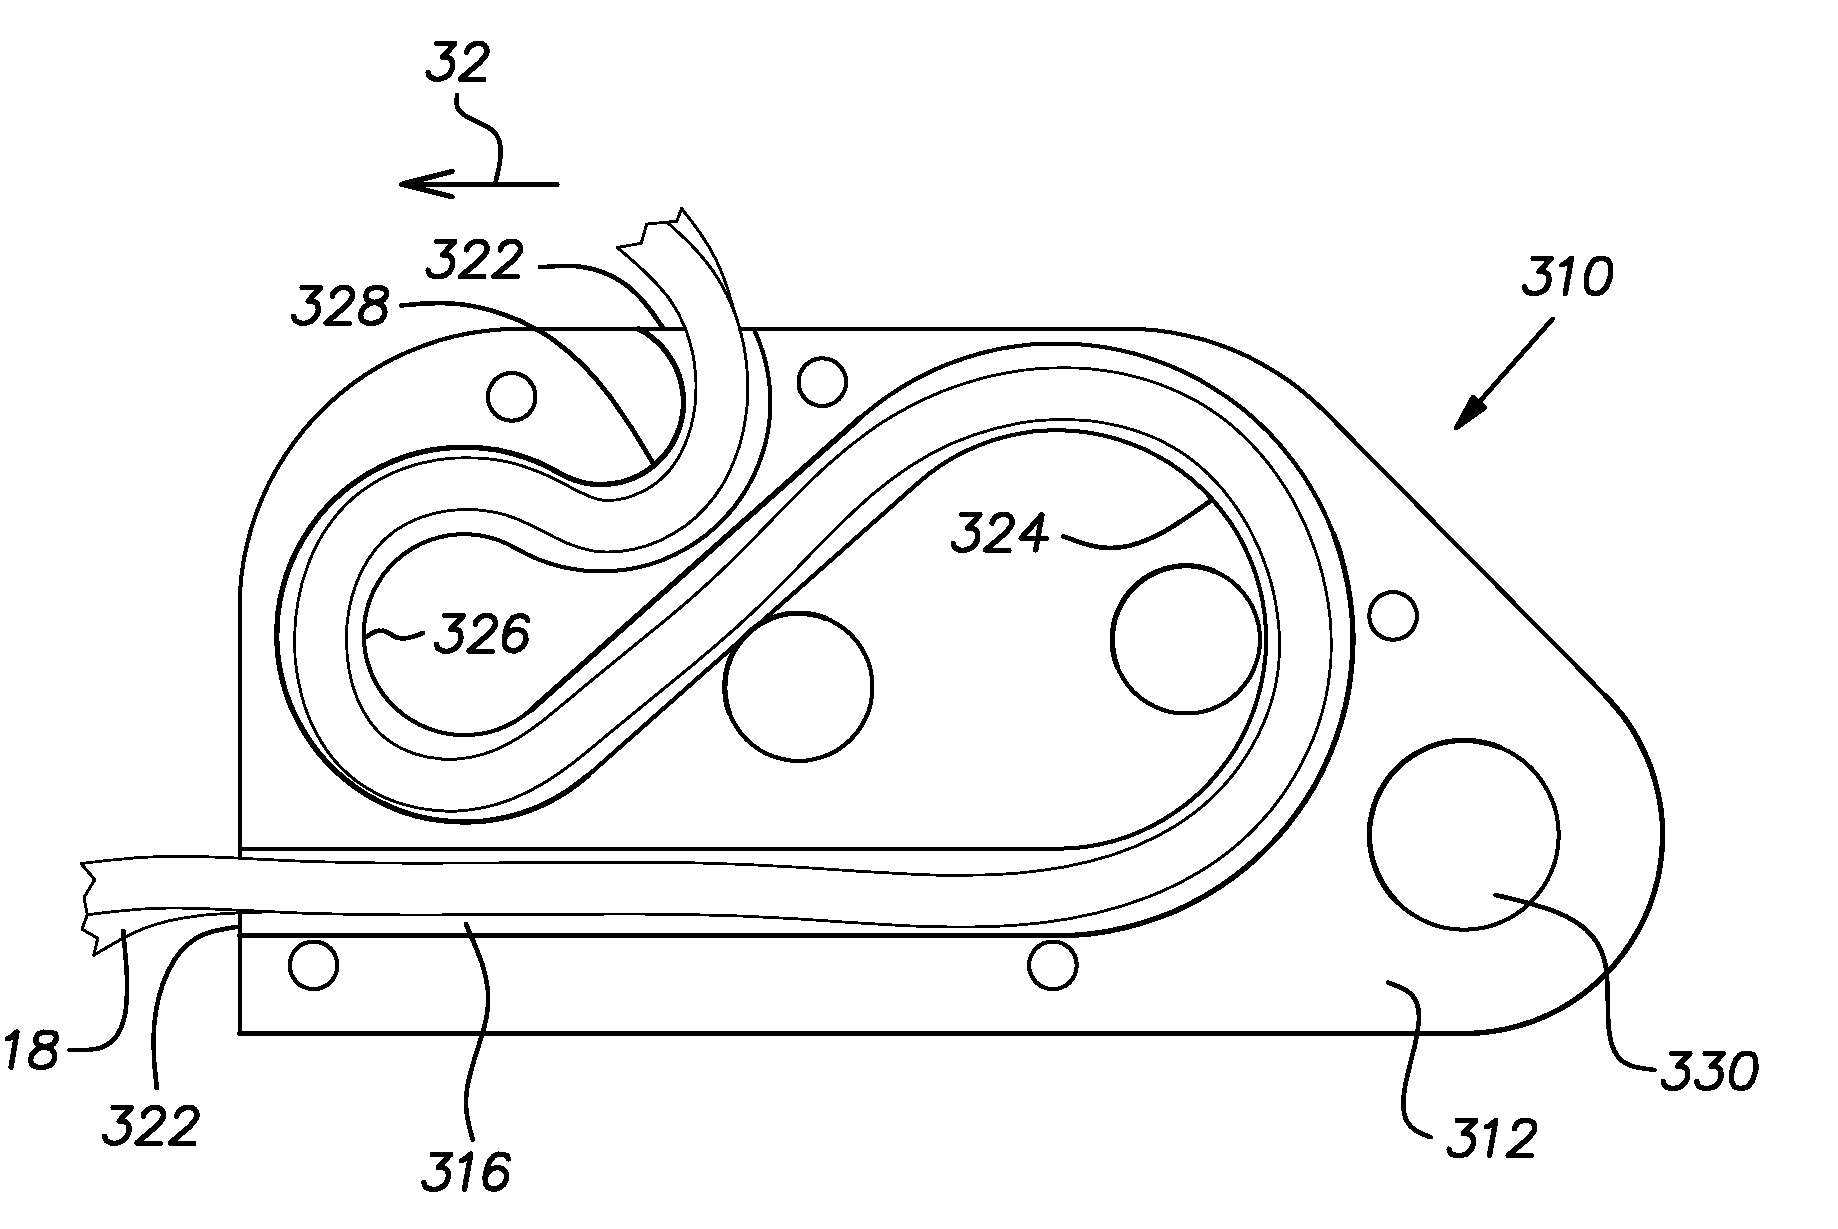 Descending device and method of use